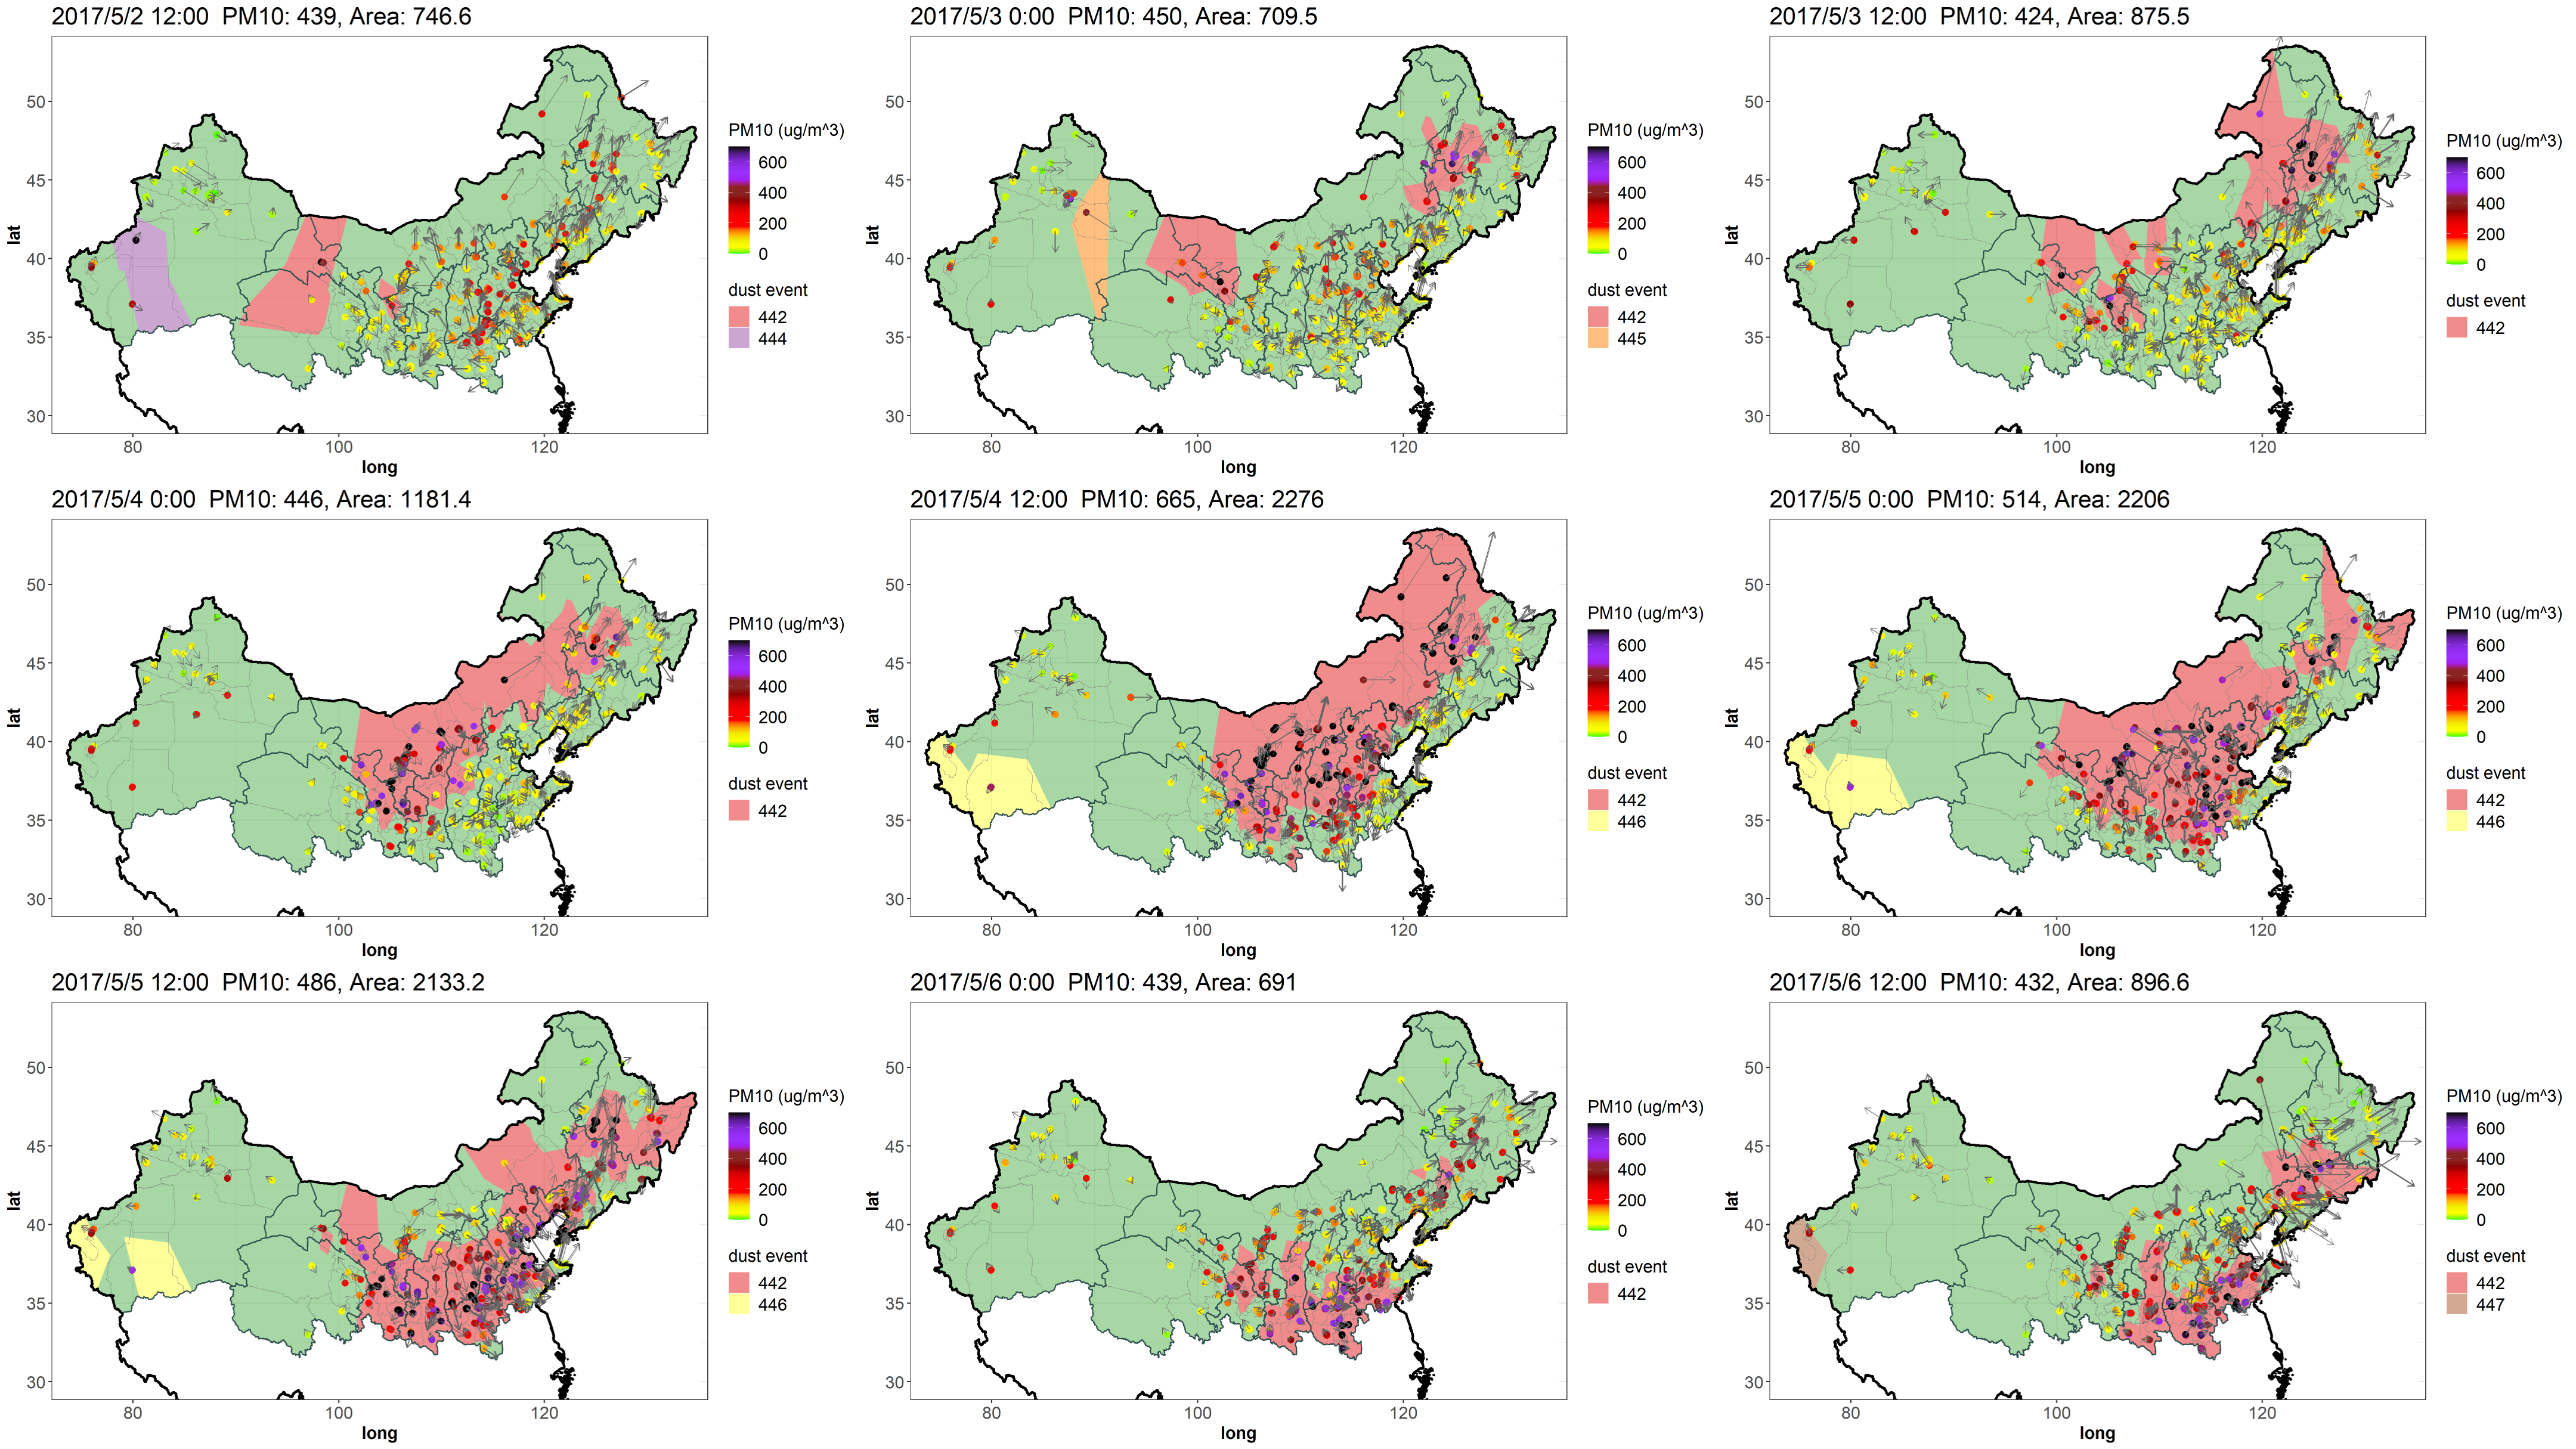 Detecting and Evaluating Dust-Events in North China With Ground Air Quality Data paper illustration